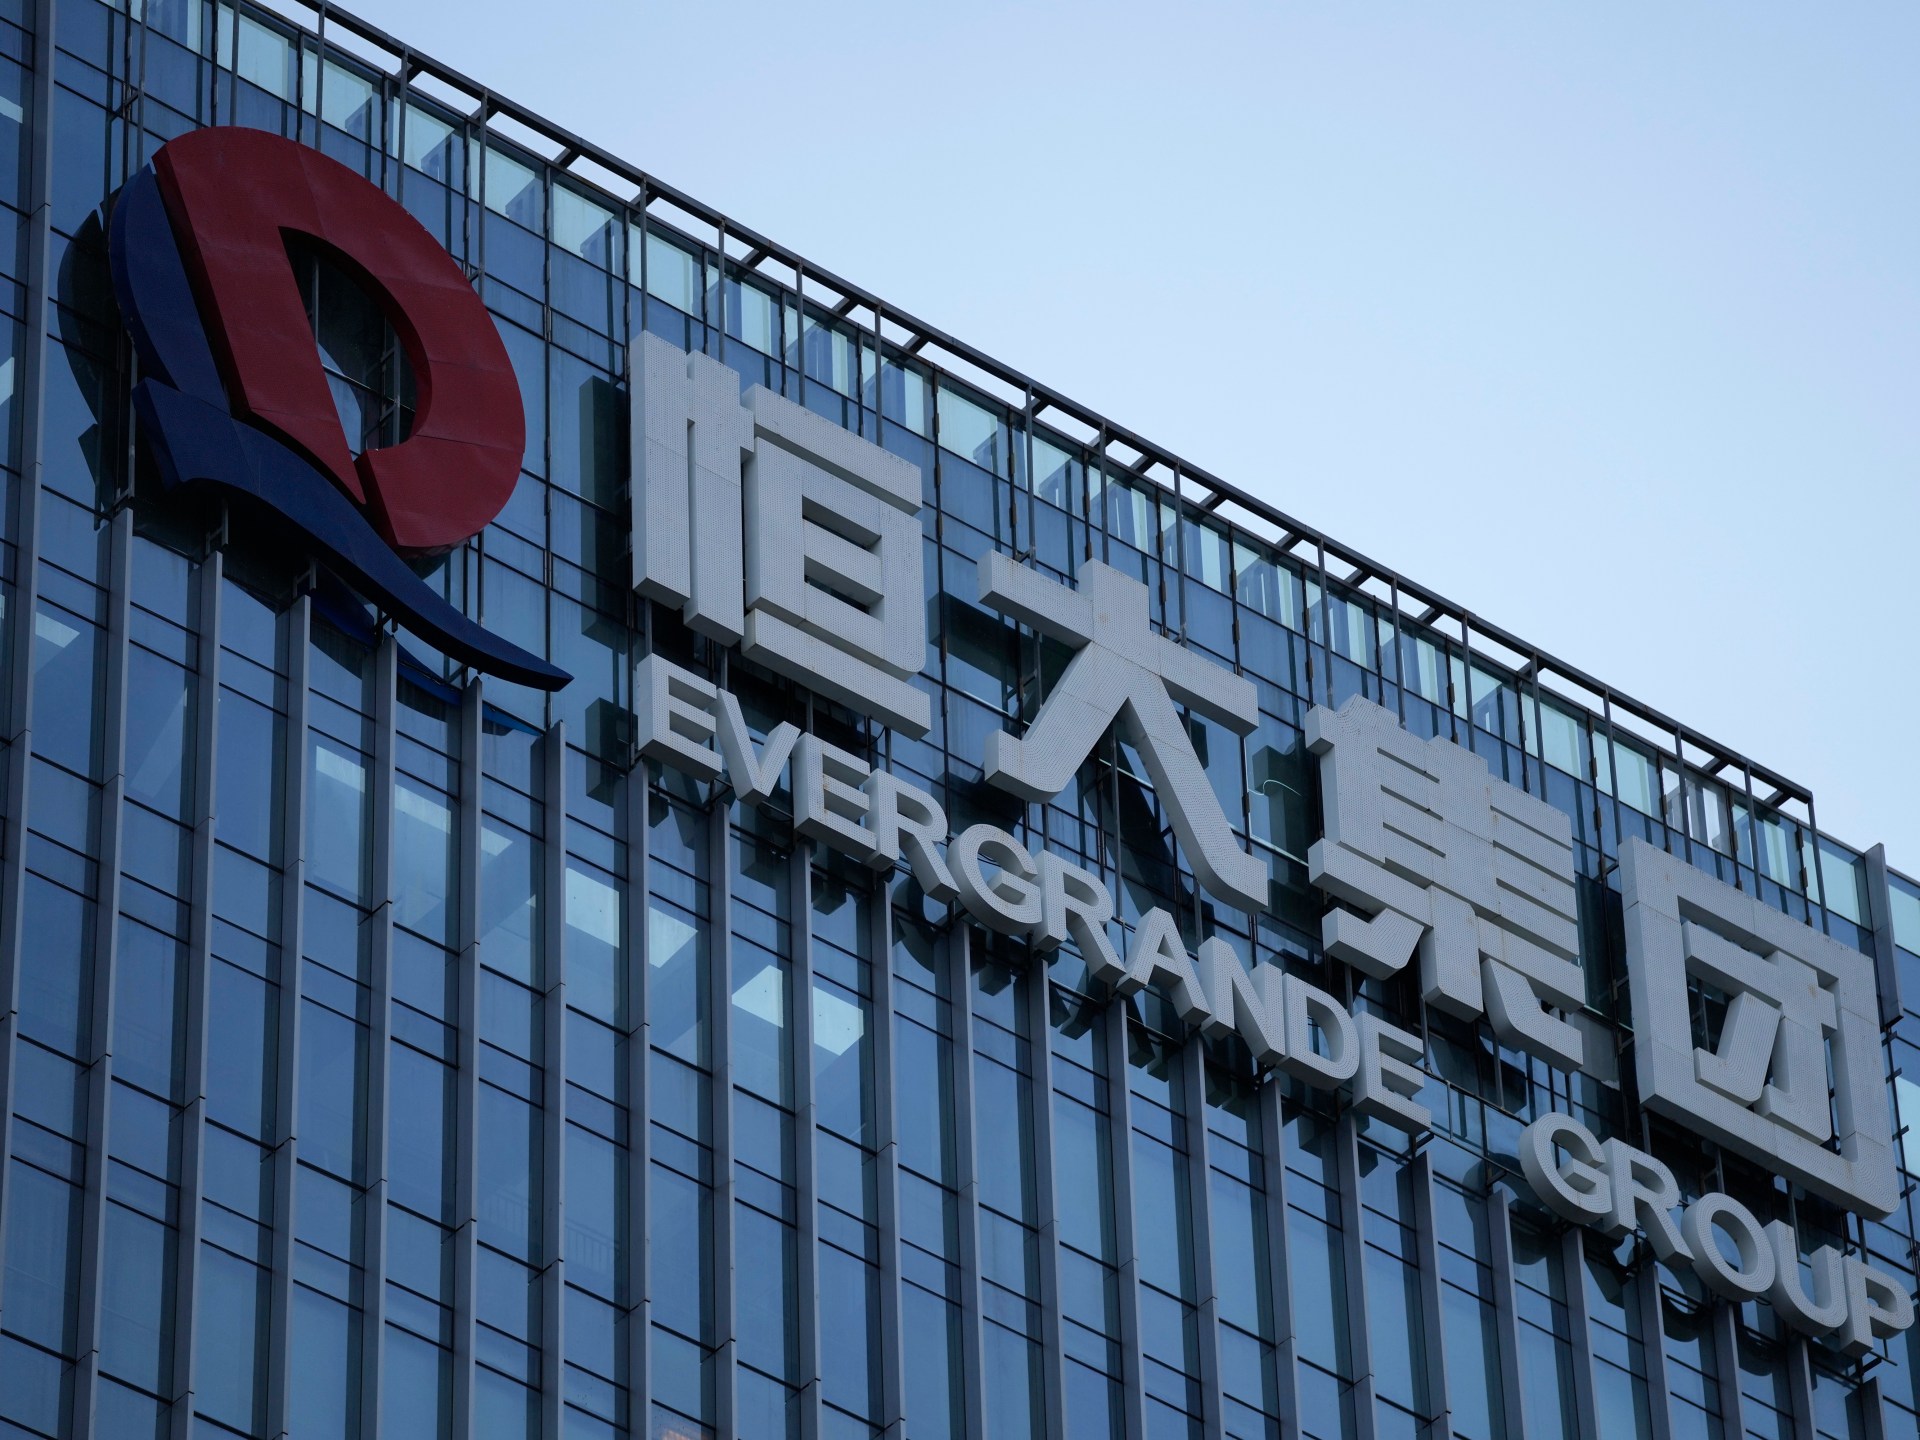 China’s property giant Evergrande ordered to liquidate as debt talks fail | Economy